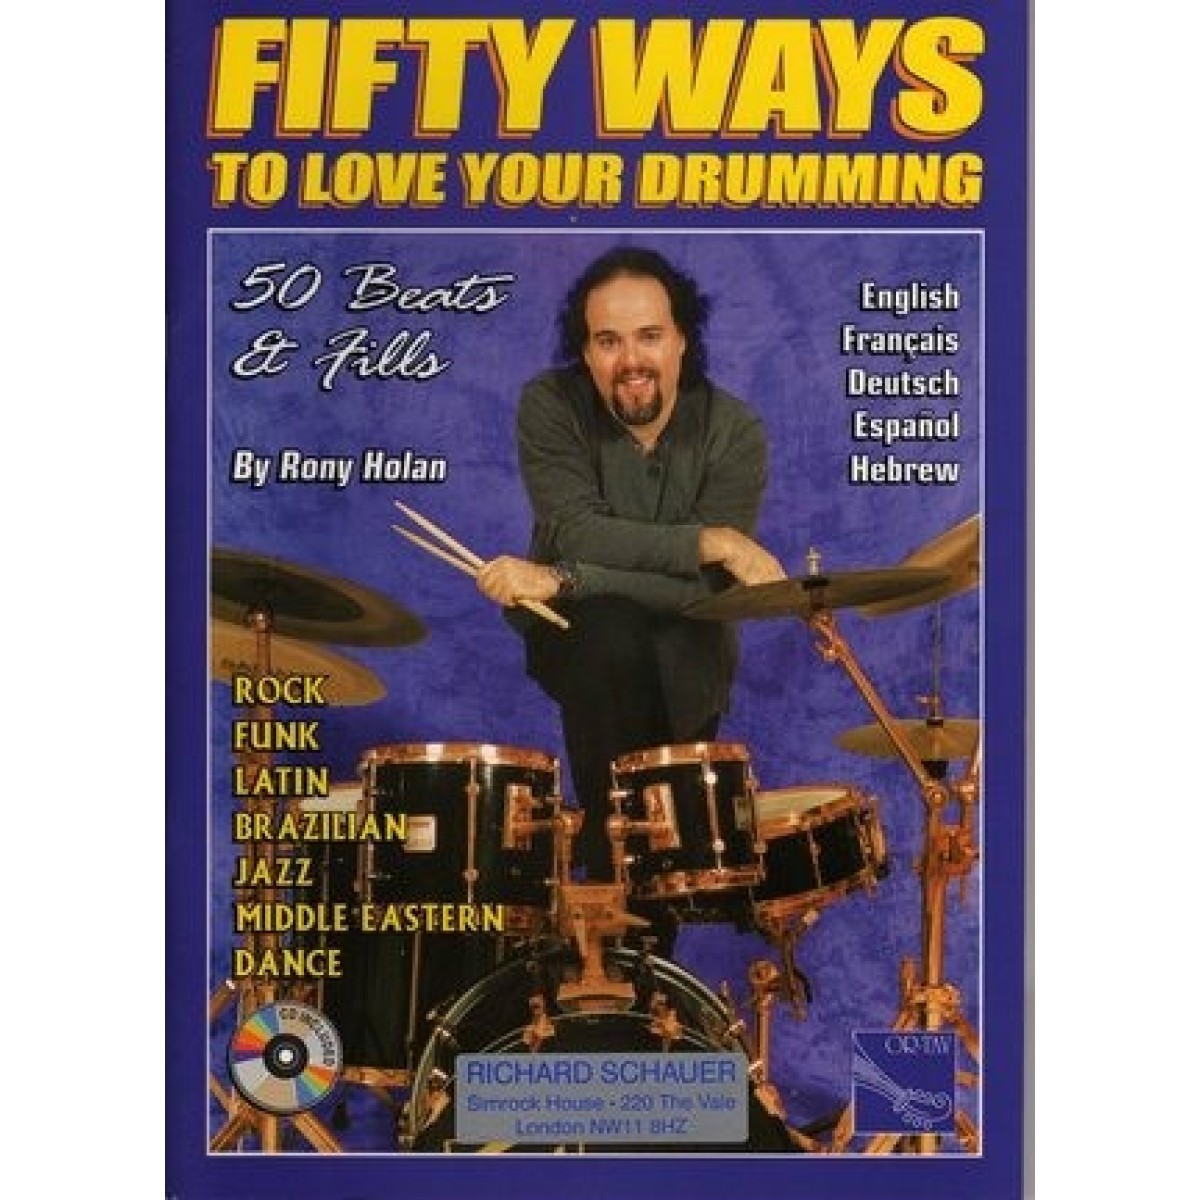 Fifty Ways To Love Your Drumming, 50 Beats And Fills